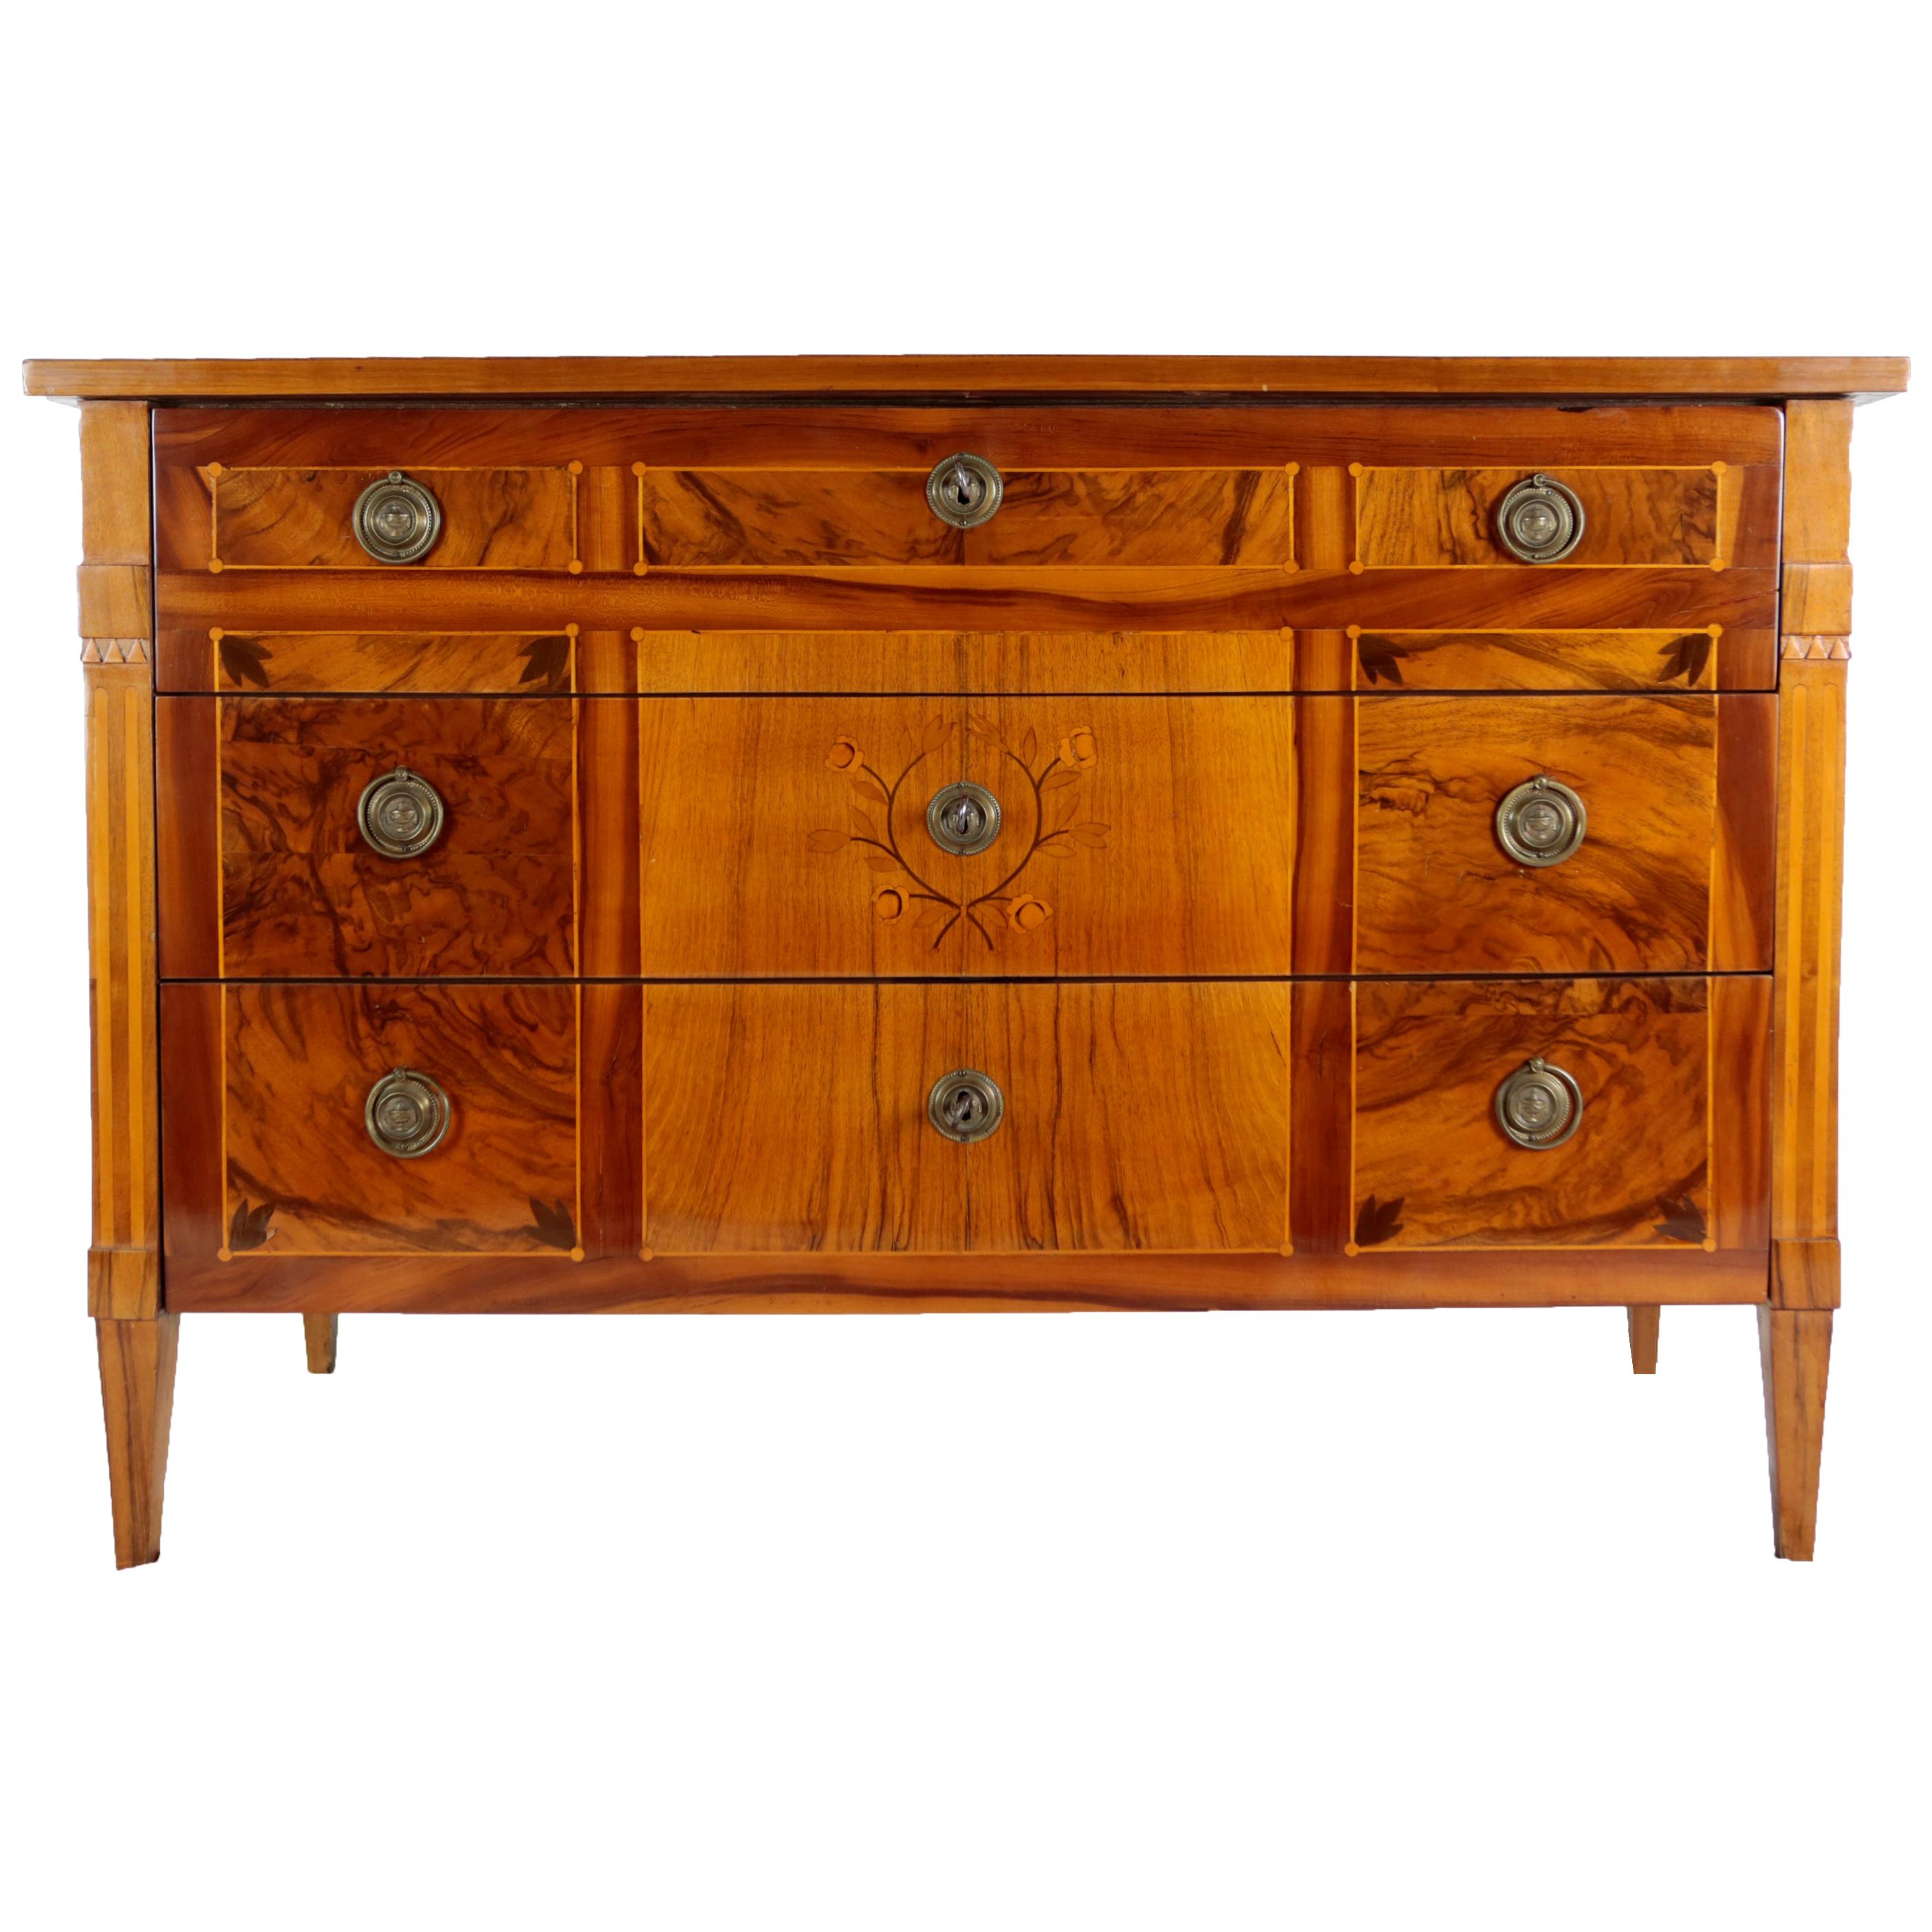 Late 18th Century Louis Seize Chest of Drawers, circa 1780, Walnut and Nutroot